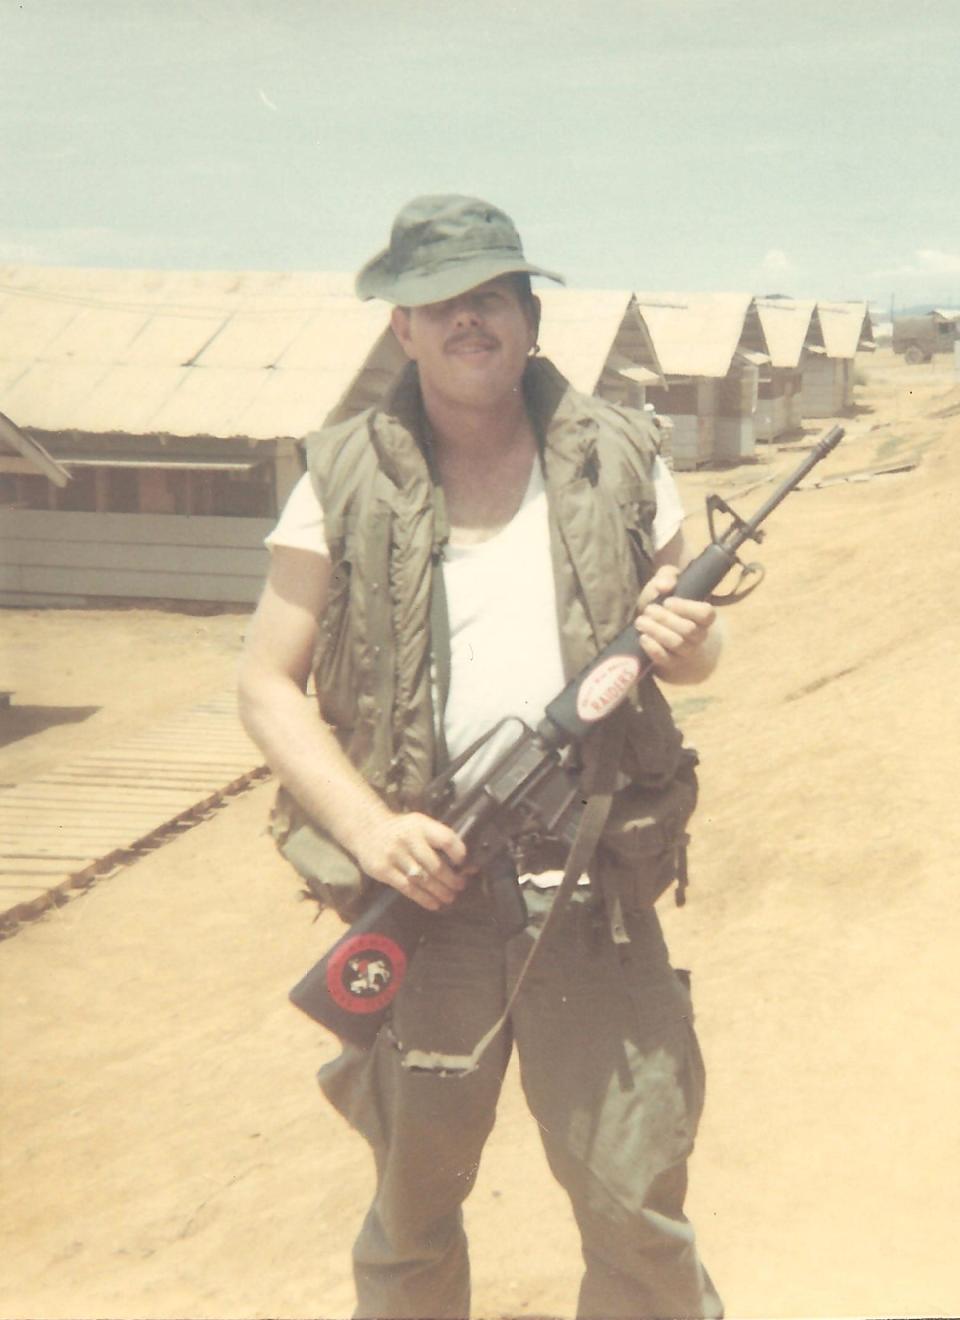 Charlie Scarborough in Chu Lai, Vietnam during his military service in June 1968.